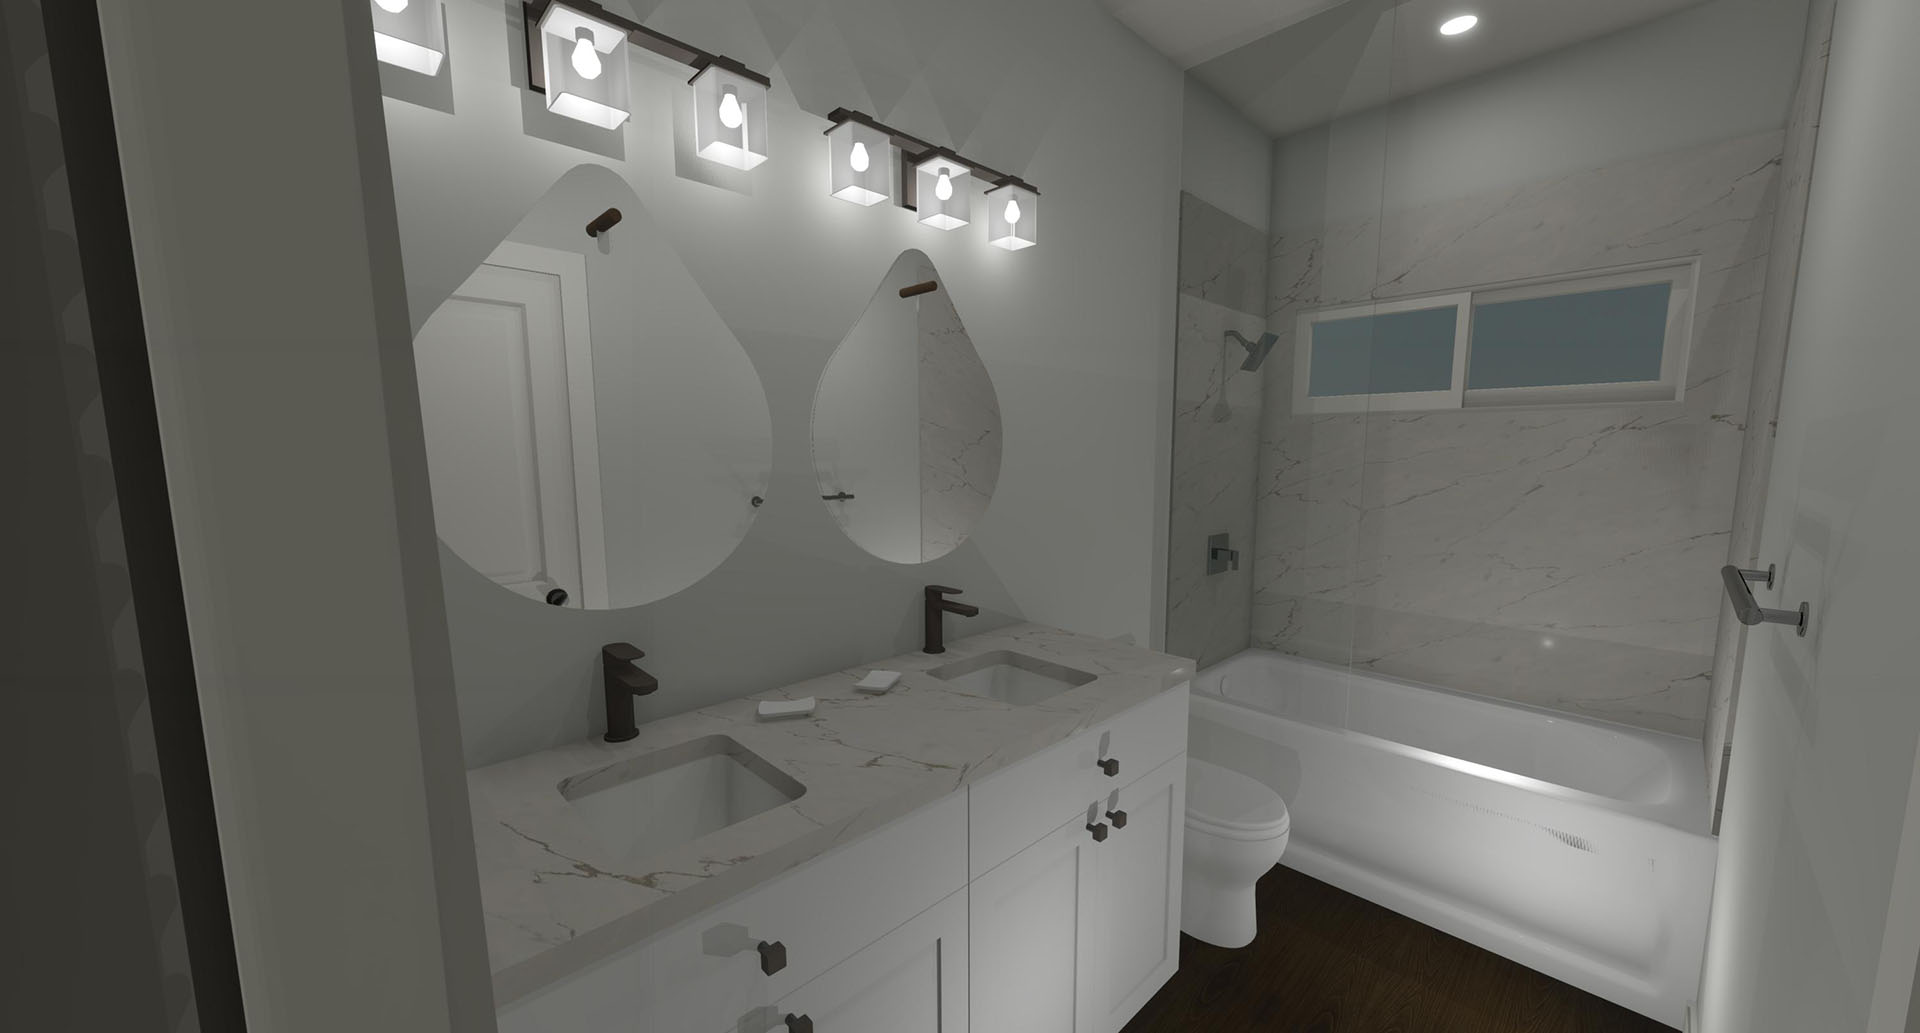 Bathroom with one shower, white cabinets, two sinks, and two circular mirrors hanging above the sinks